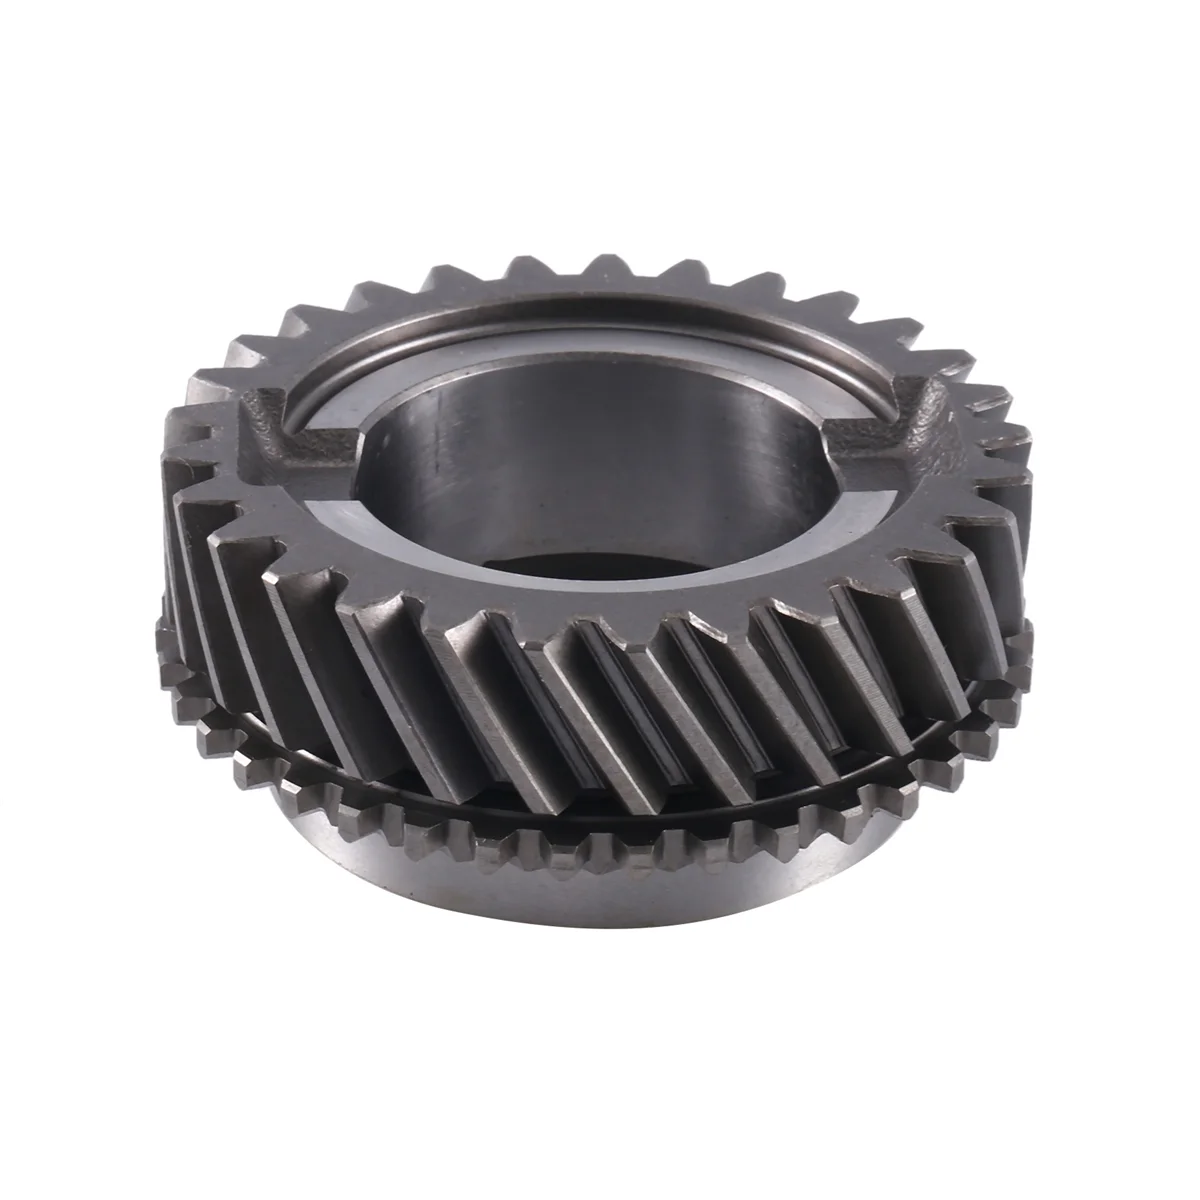 

Car TRANSMISSION 5Th GEAR ASSY for Ssangyong Istana MB VAN MB100 & MB140 SERIES 6612603419